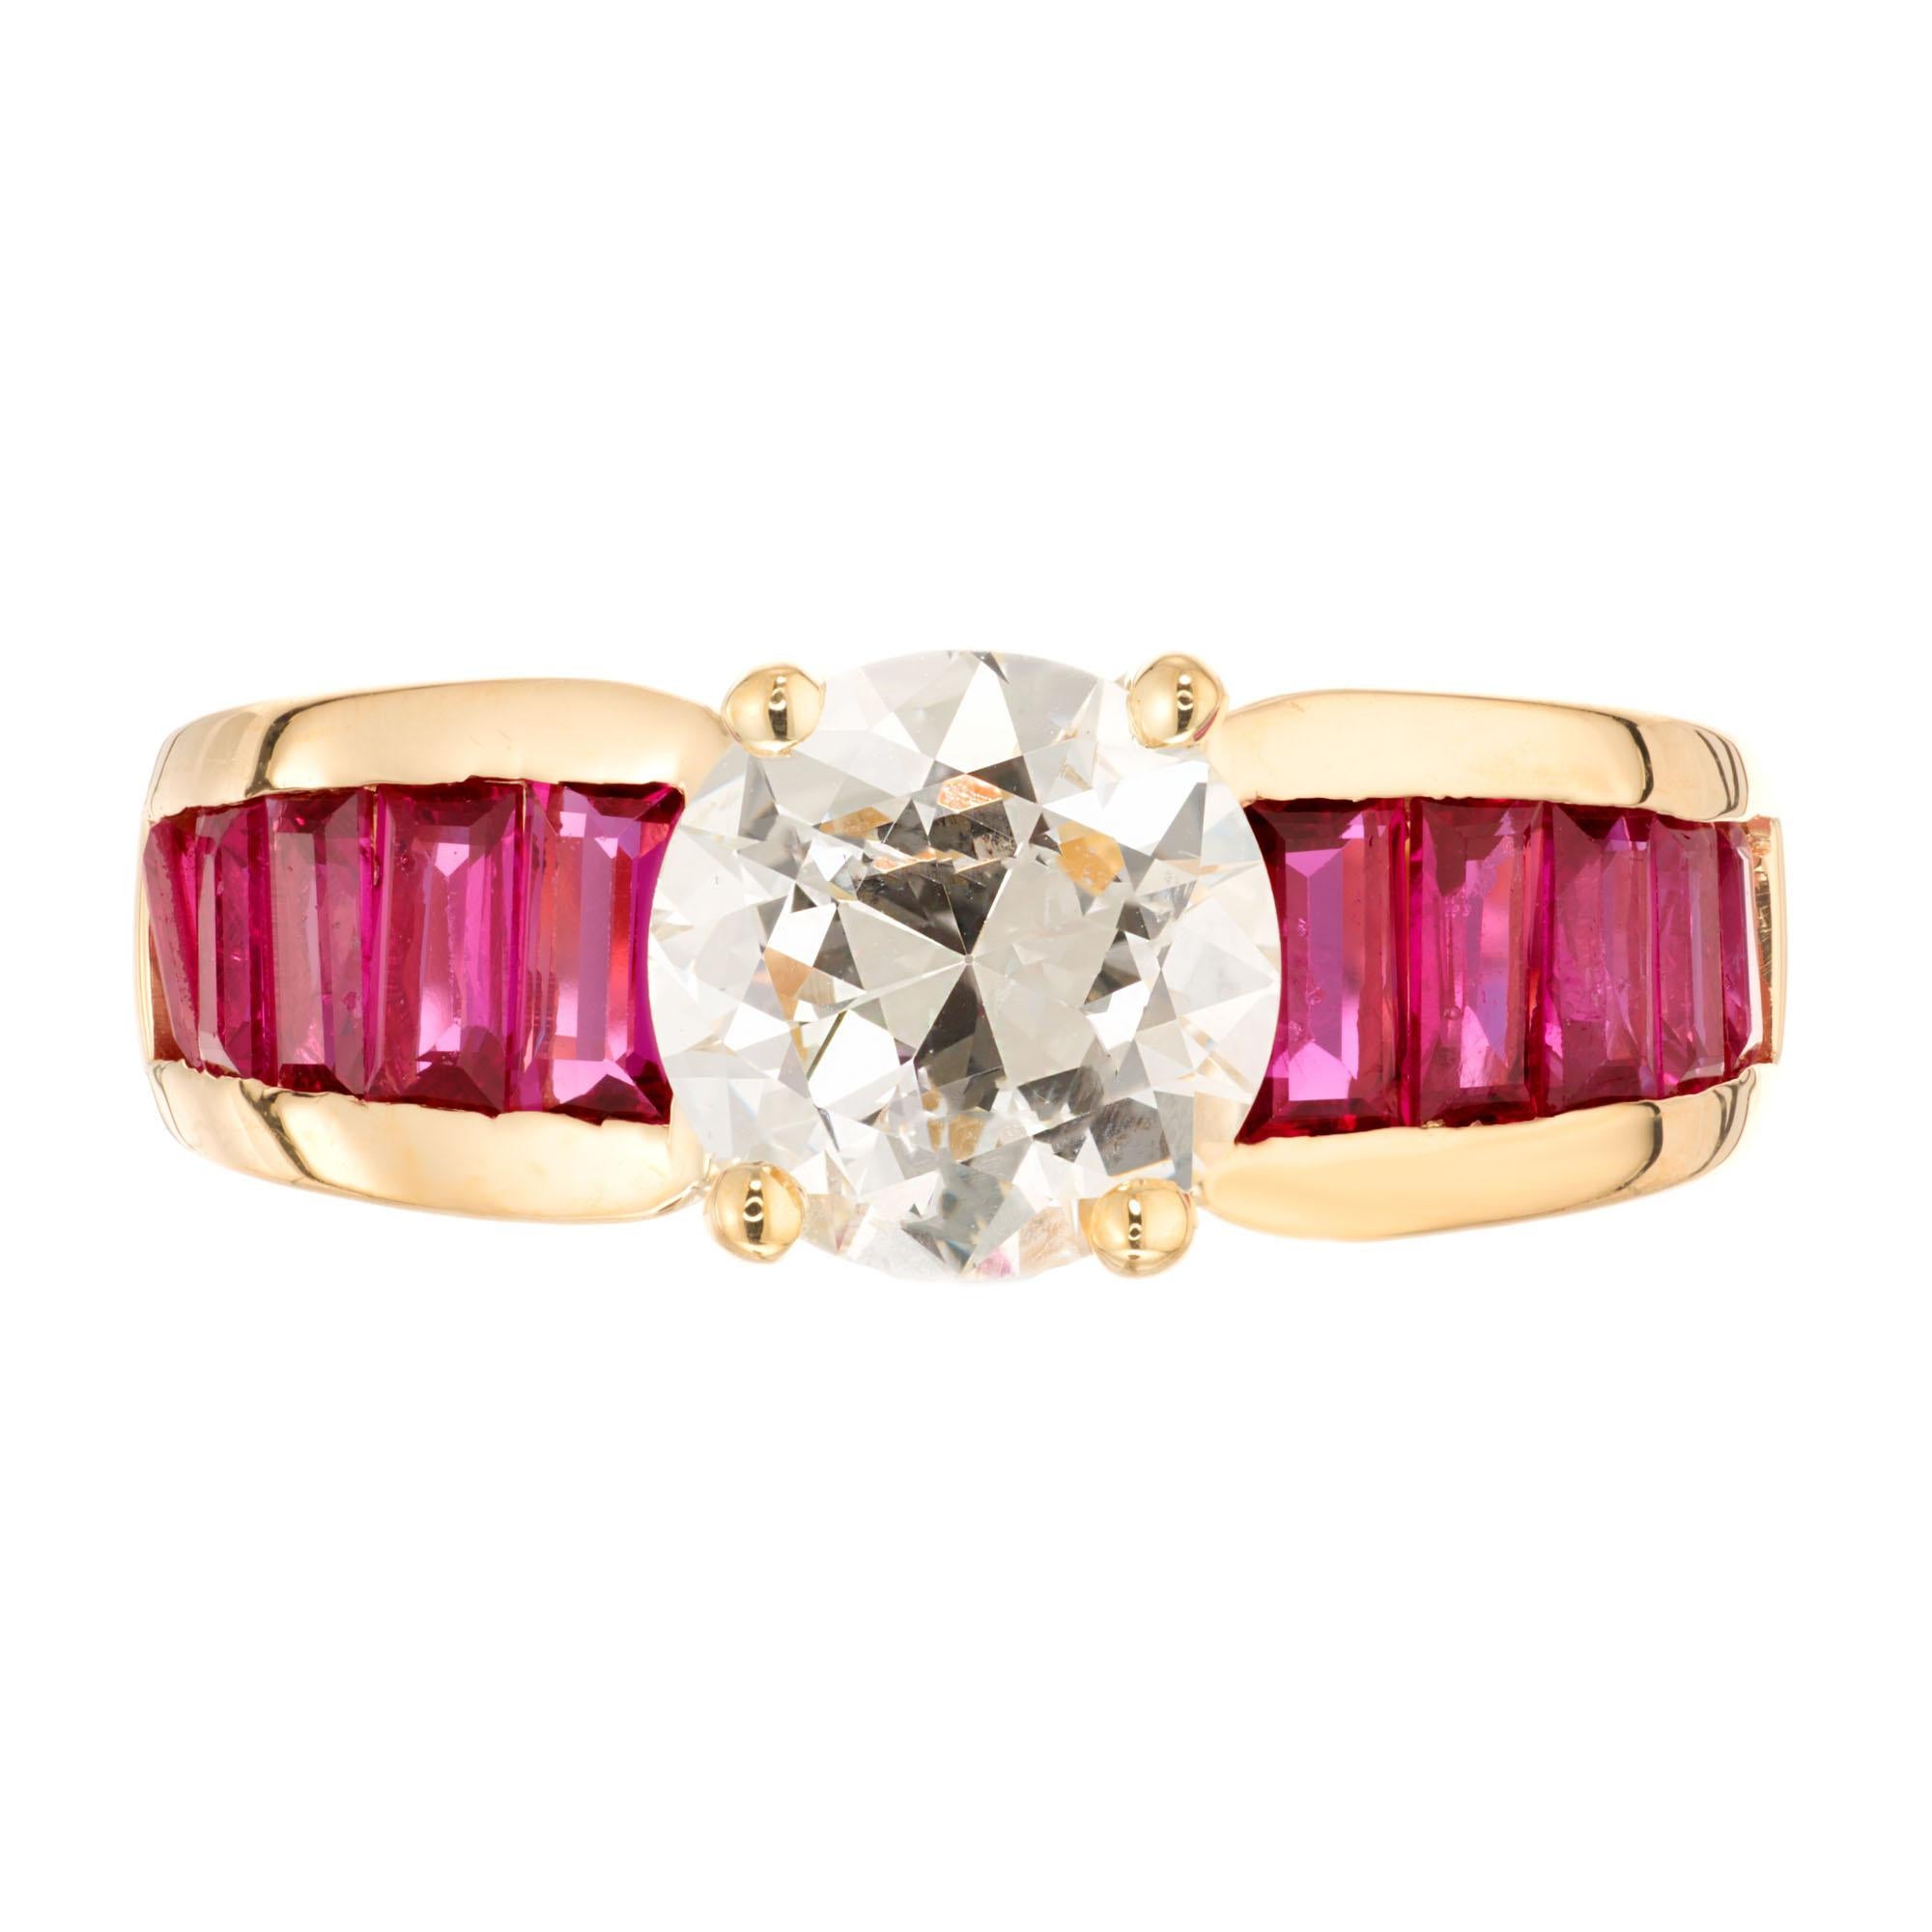 1950's Mid-Century Diamond and ruby engagement ring. GIA certified transactional cut center diamond circa 1950's, accented with 10 step cut channel set baguette rubies. GIA certified purplish red natural rubies. Simple heat only. GIA certified round